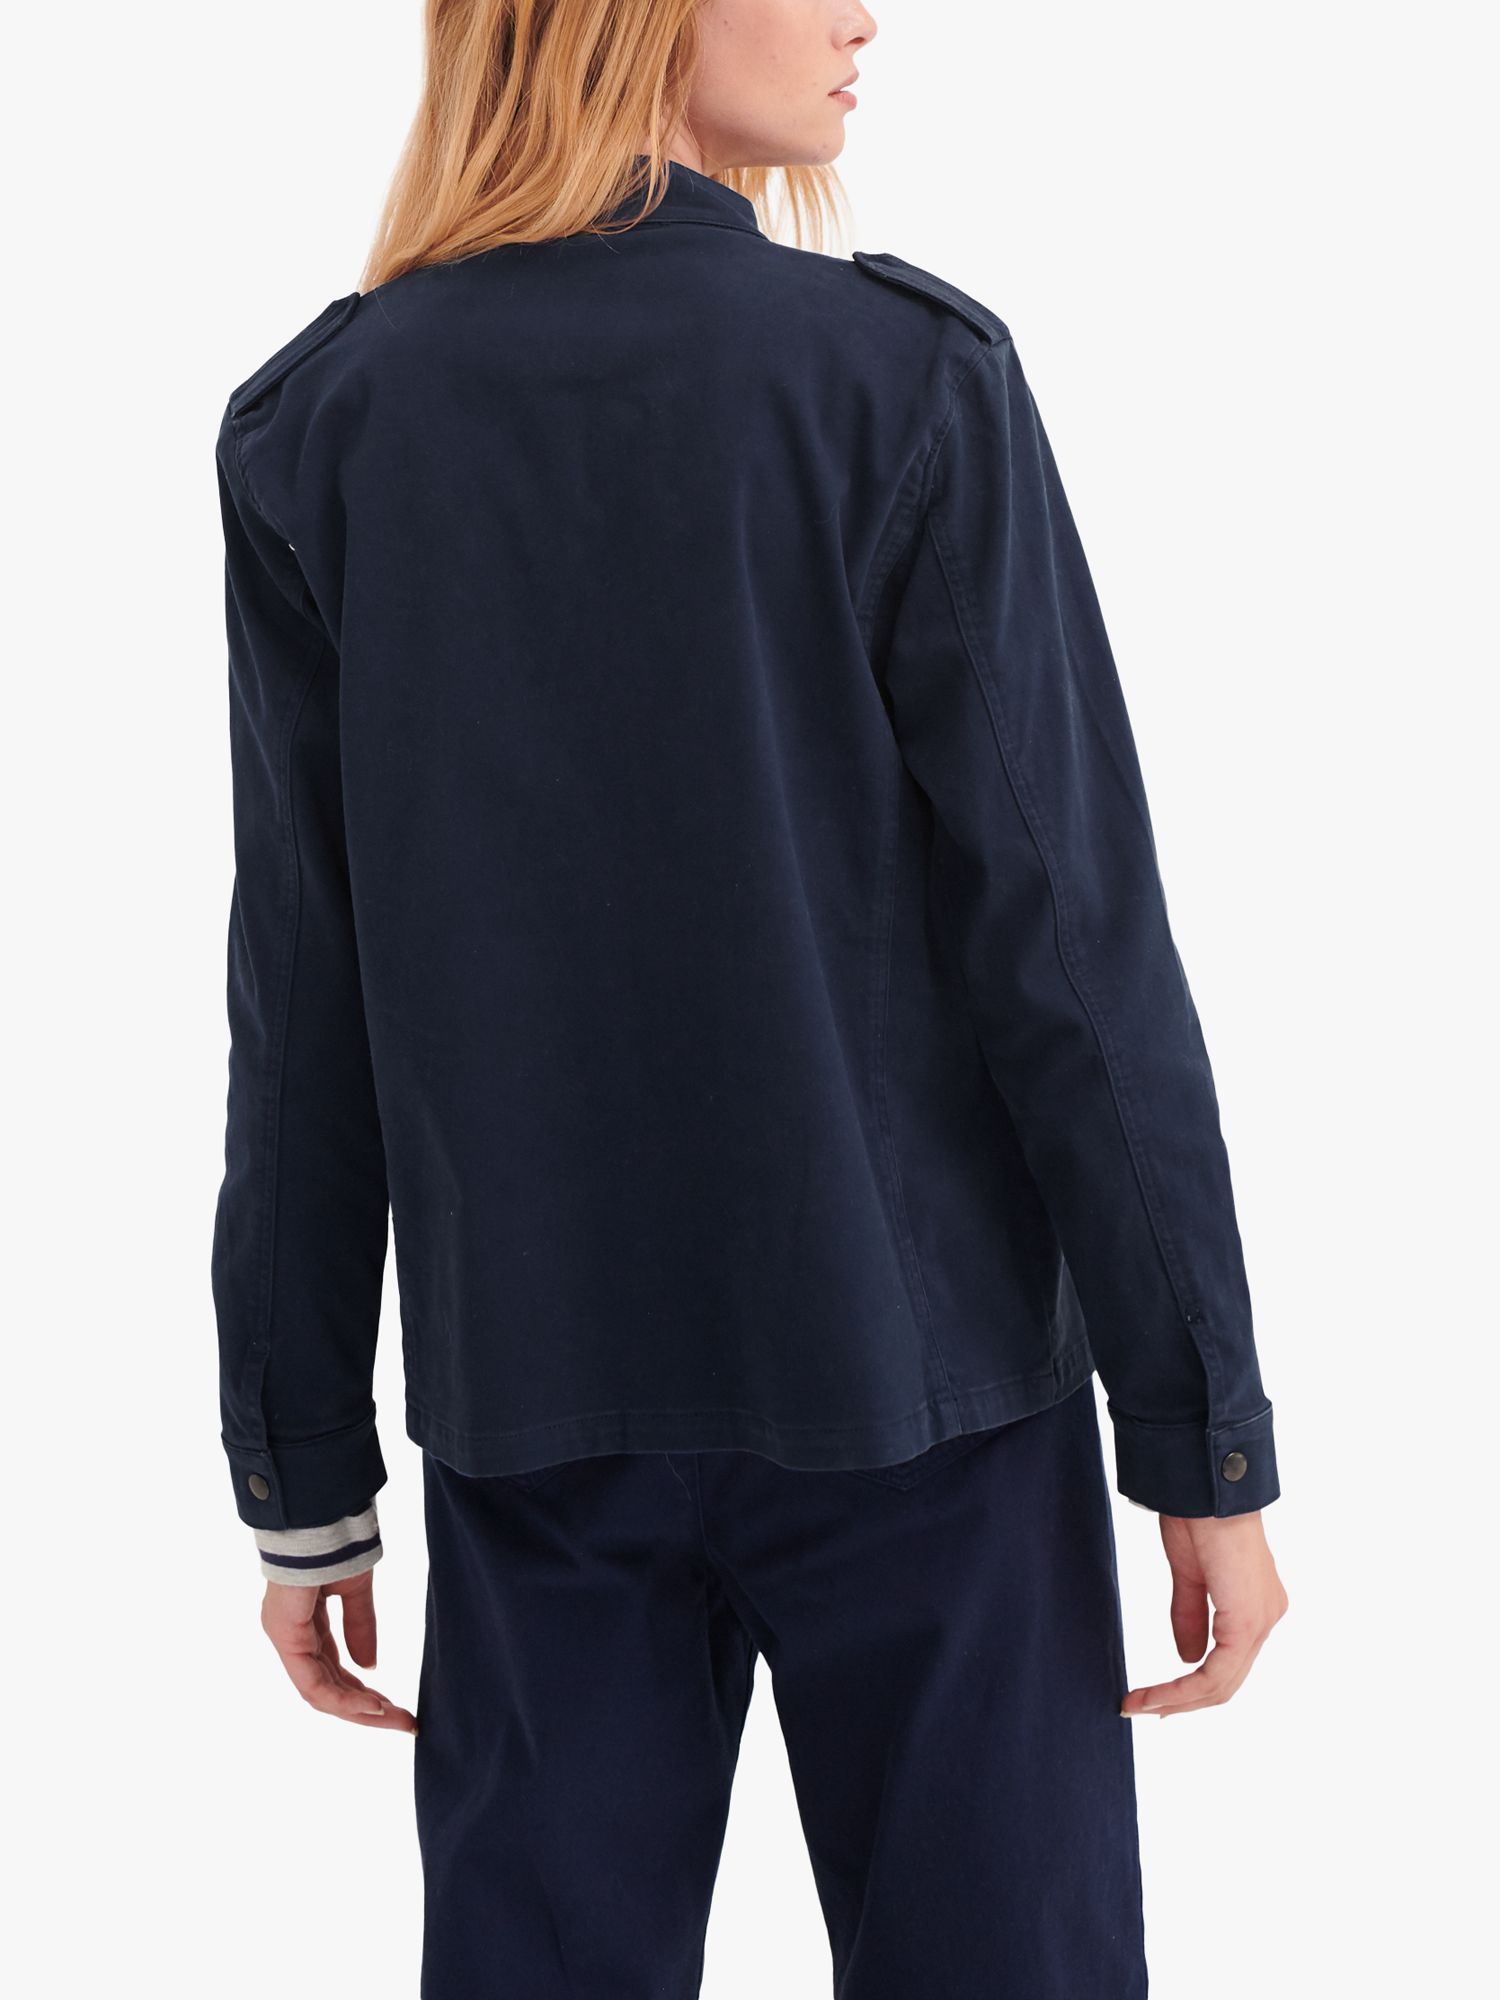 NRBY Monica Cotton Utility Jacket, Navy Blue at John Lewis & Partners